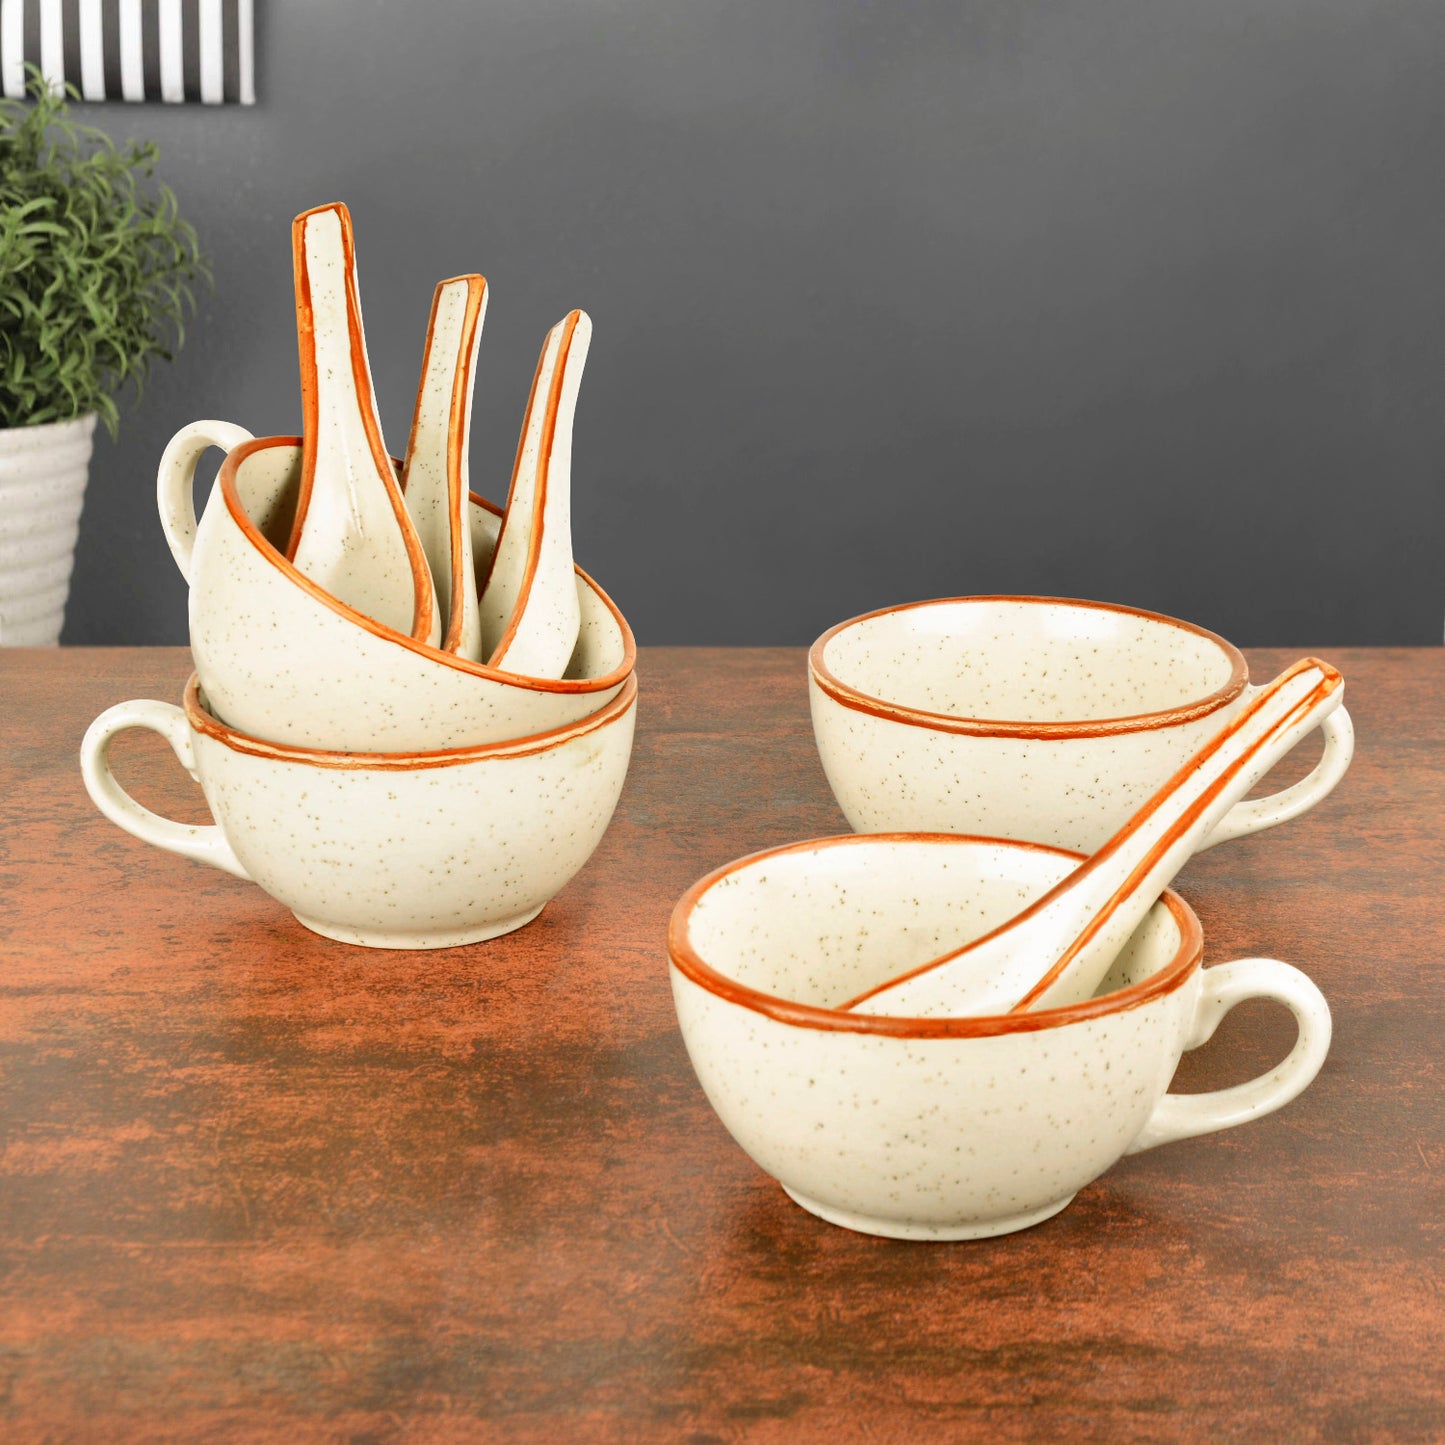 Ceramic Matt Finish Soup Cups with Spoon (250 ml each, Set of 4, White)